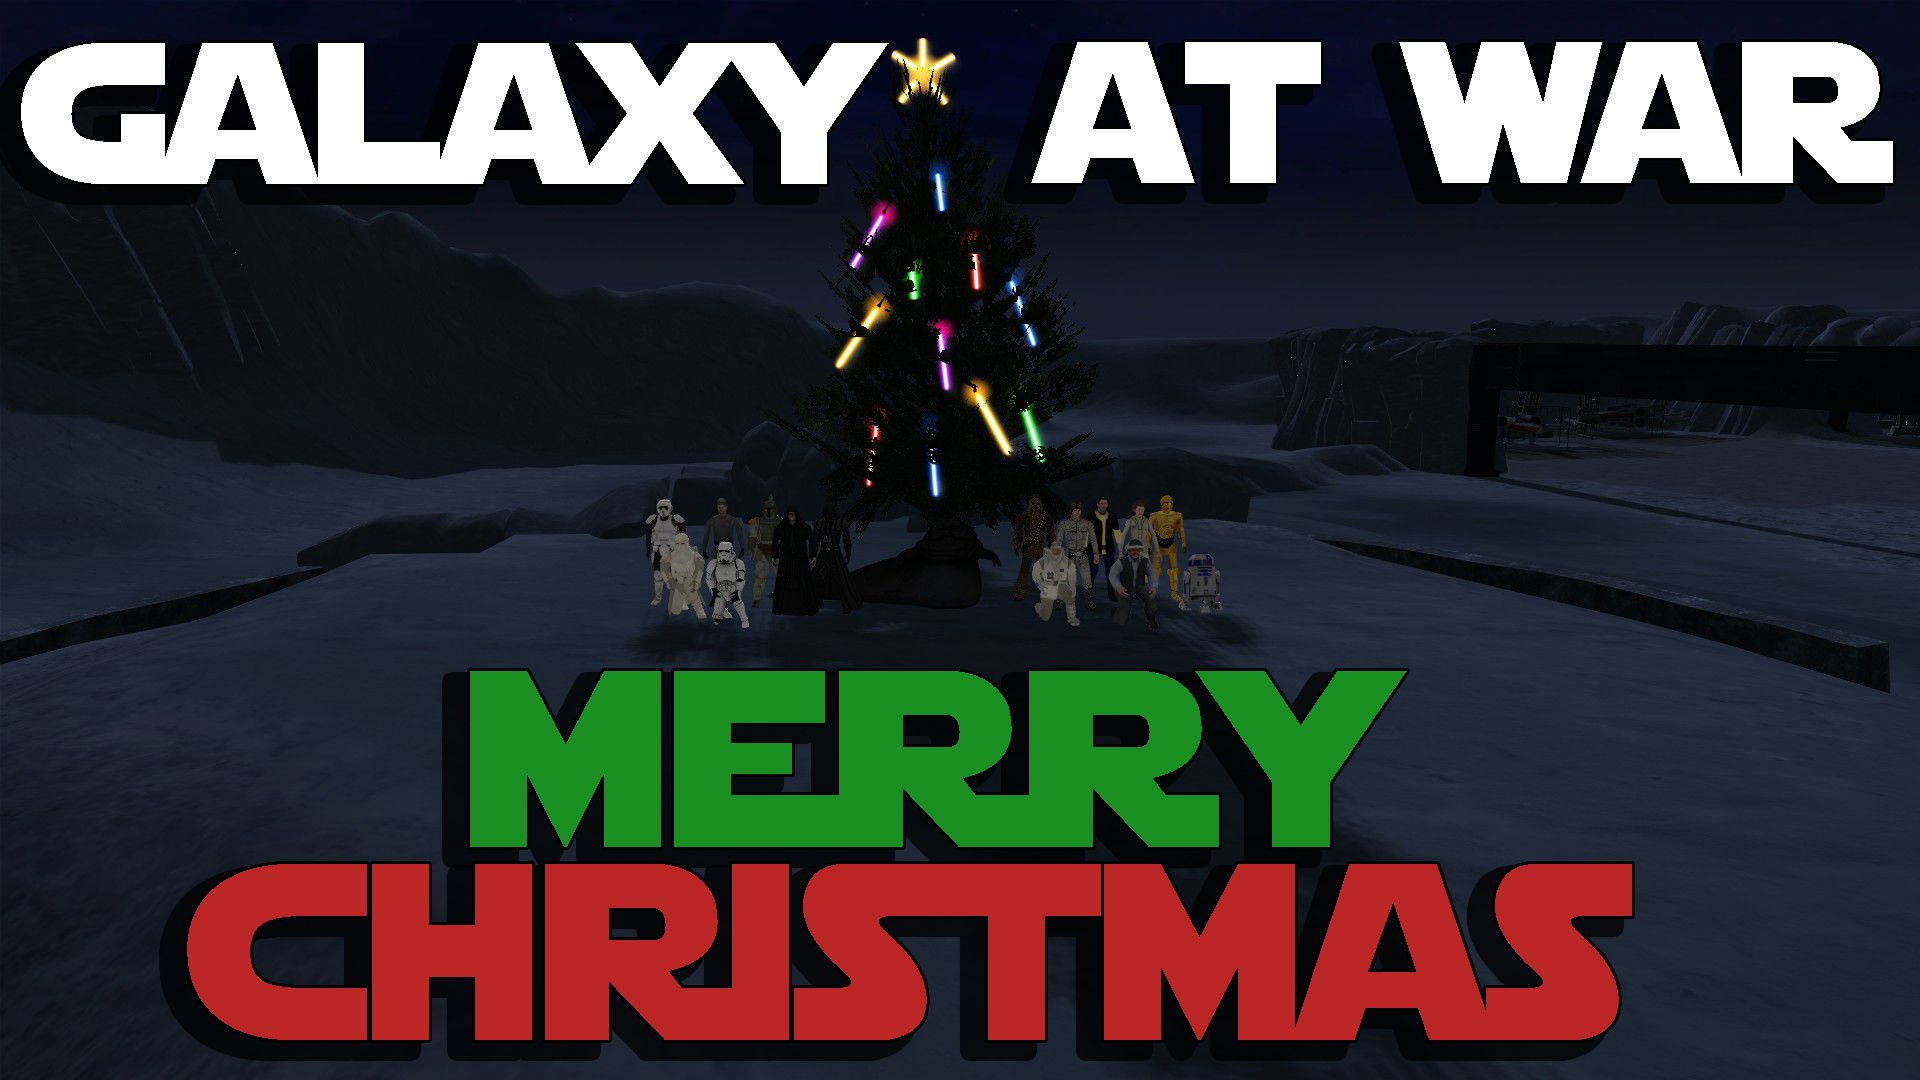 A Star Wars Christmas - May The Force Be With You! Background